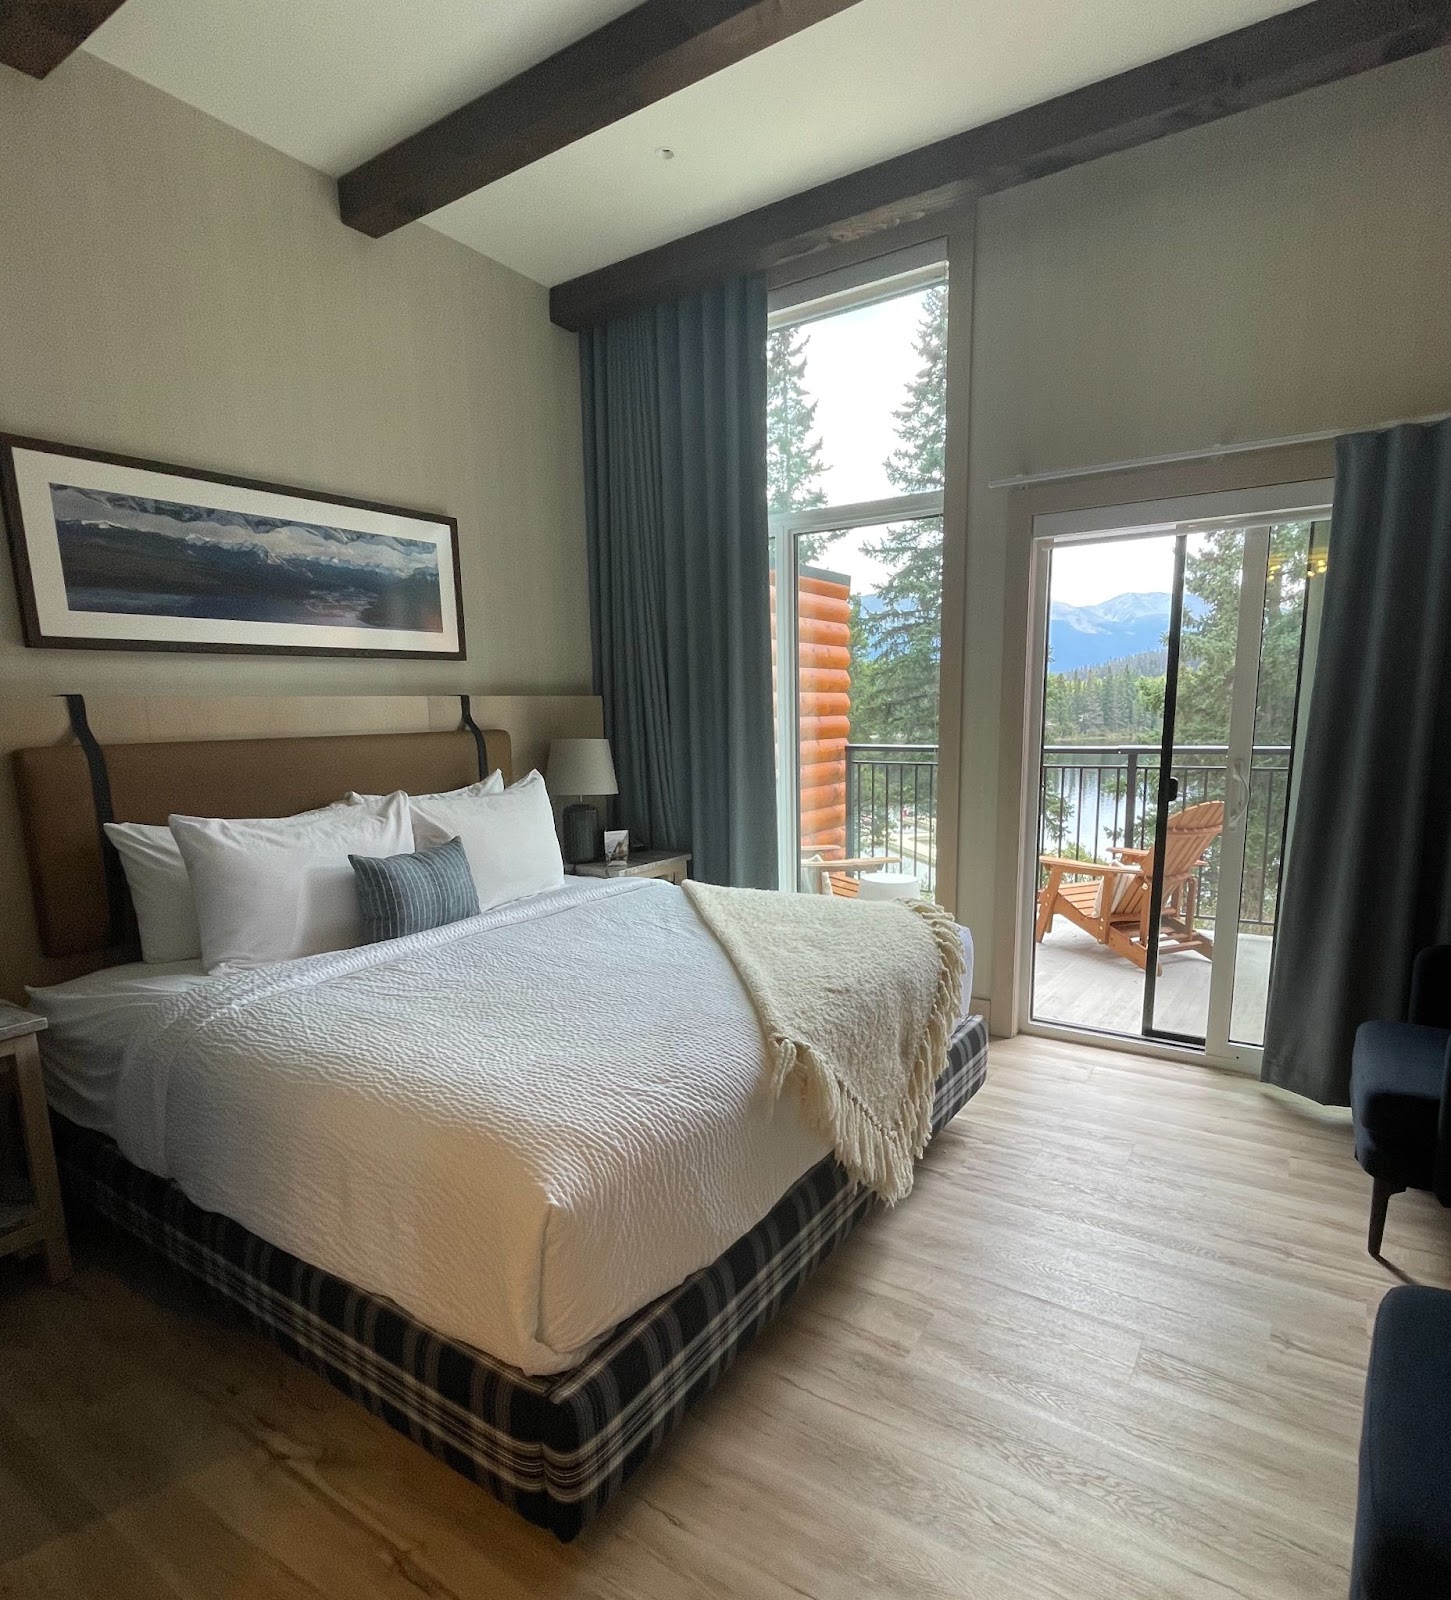 5 Days in Banff and Jasper National Parks: Pyramid Lake Lodge Founders Room